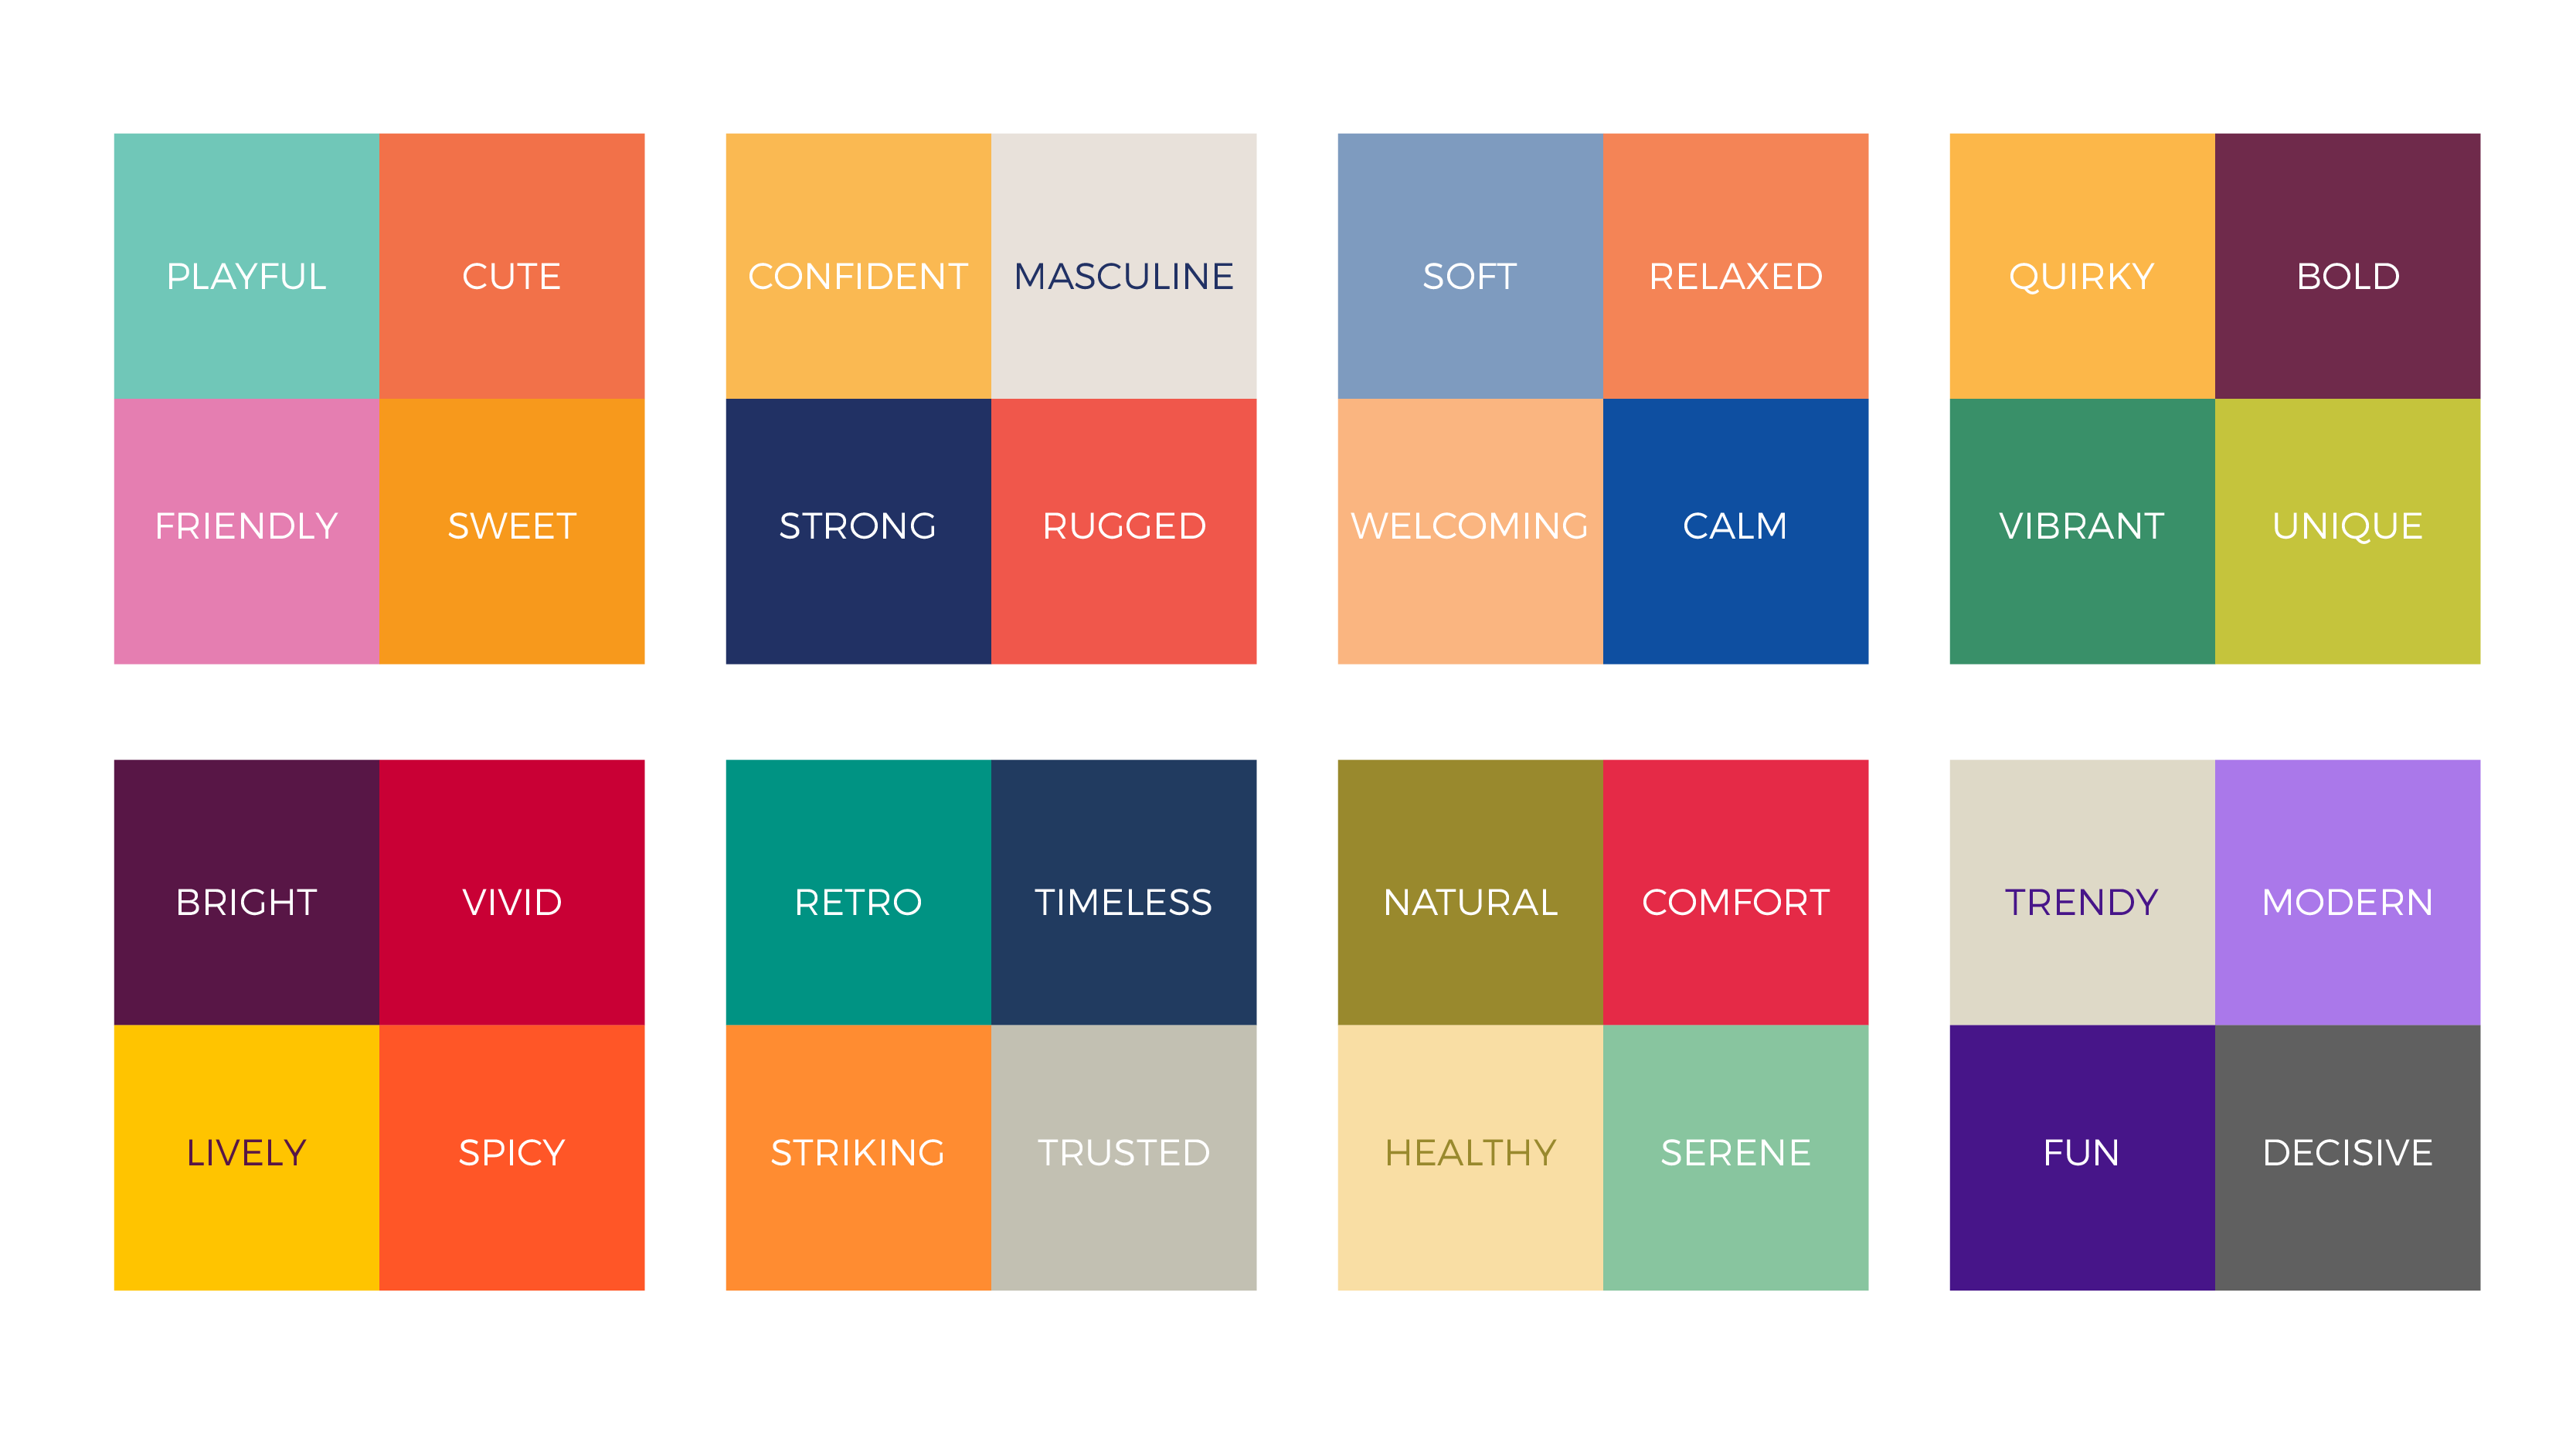 Examples of color combinations and emotions